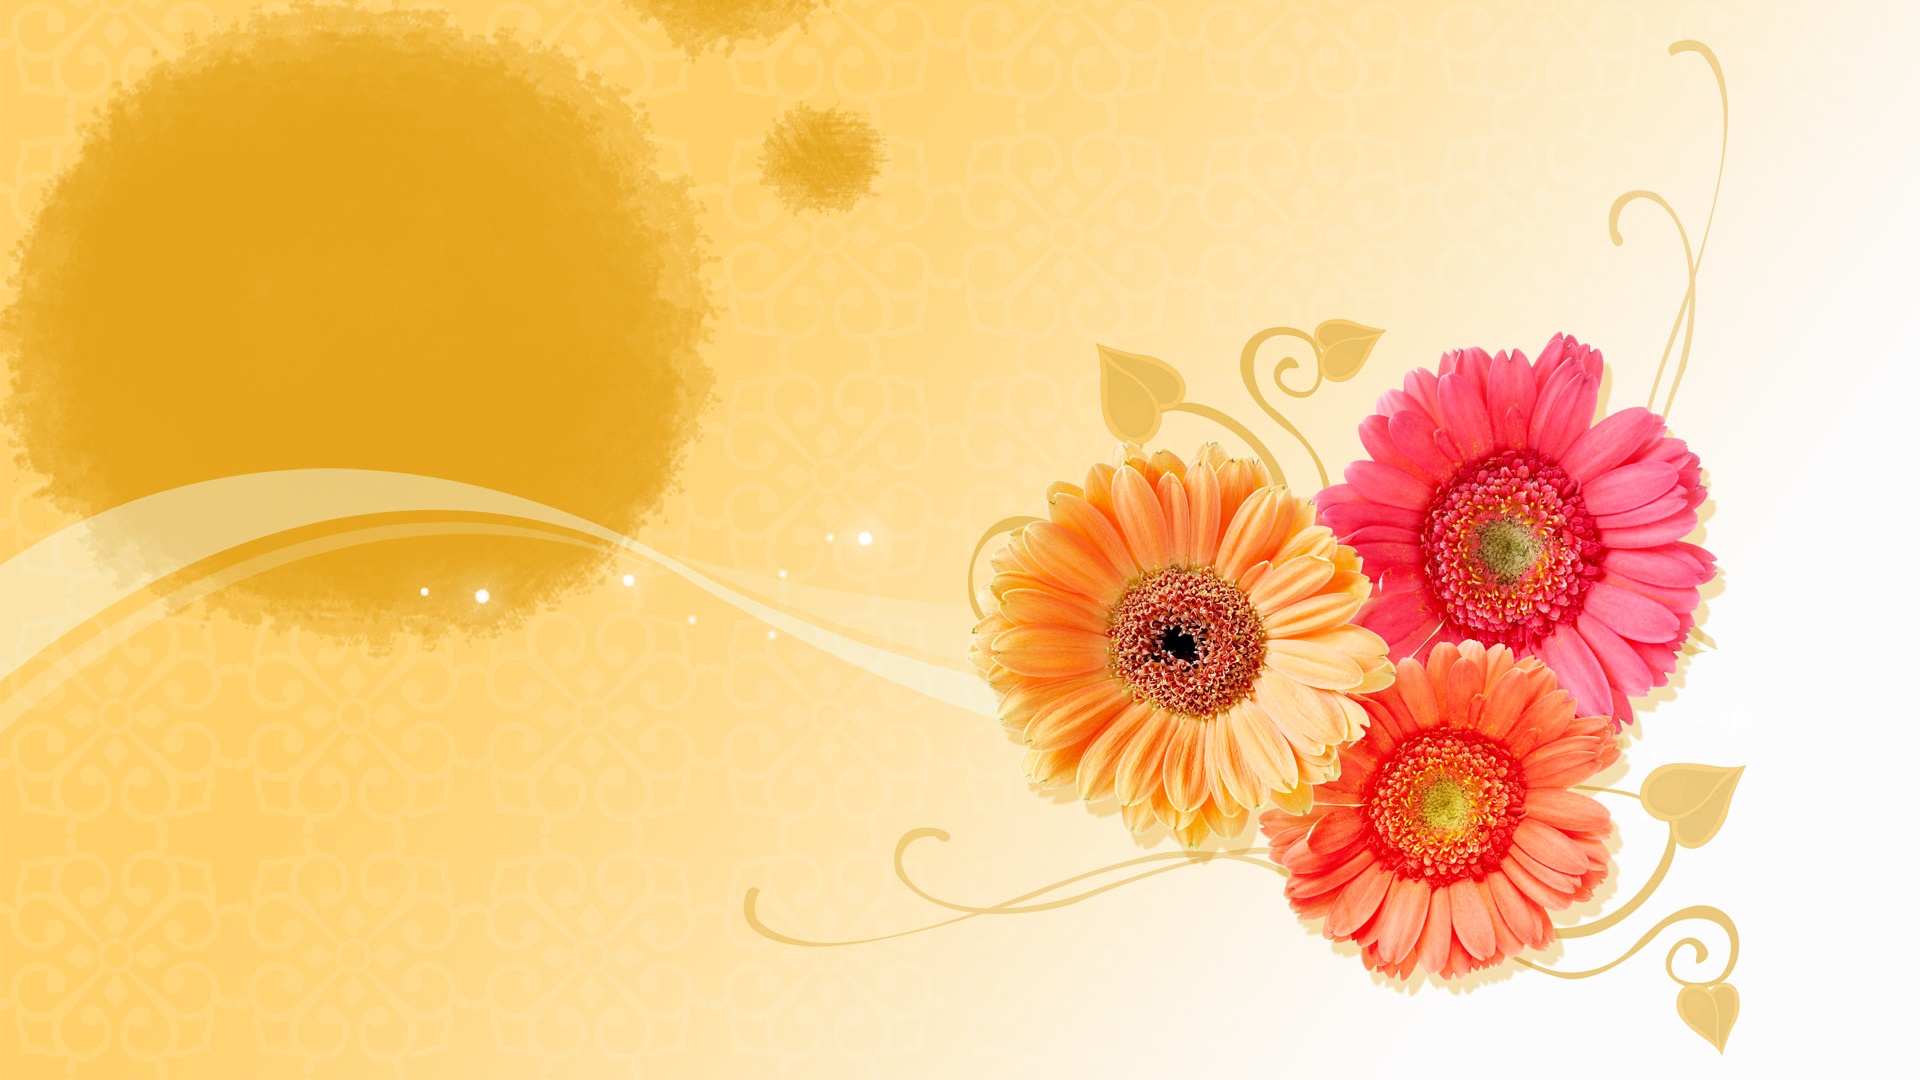 May Flowers Wallpaper 1920x1080